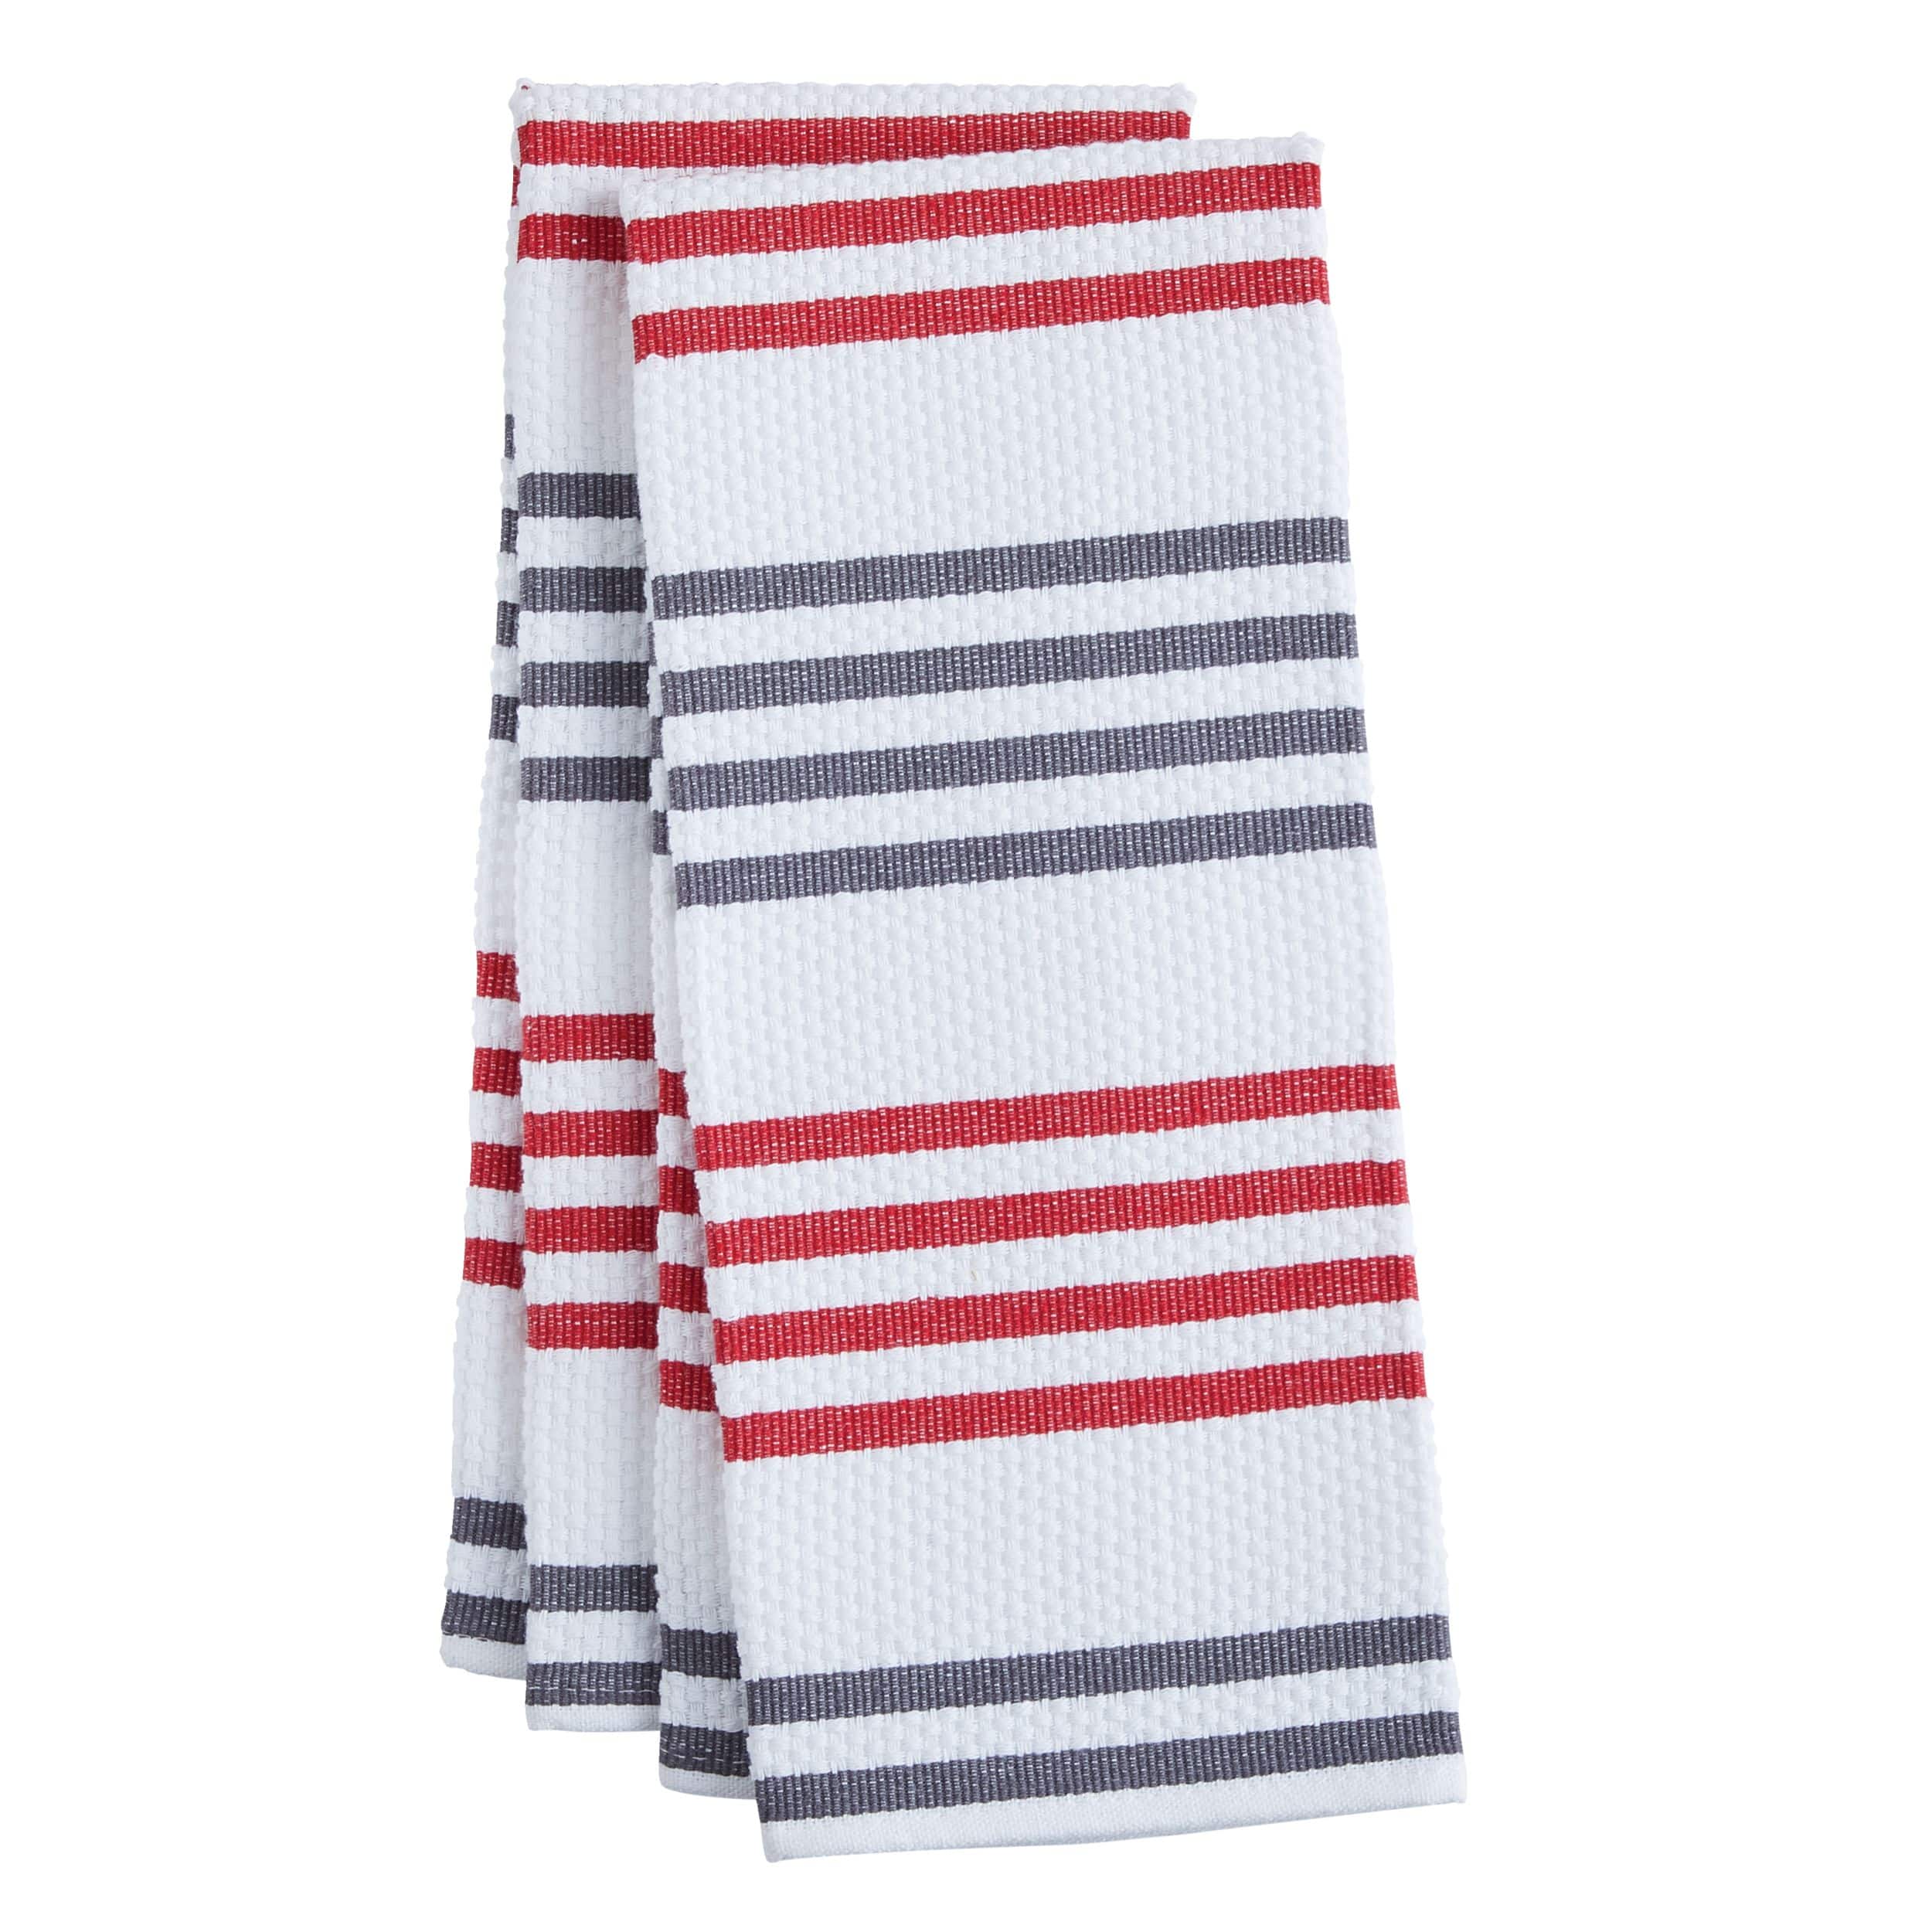 https://media-www.canadiantire.ca/product/living/kitchen/dining-and-entertaining/1422717/paderno-basketweave-kitchen-towel-2-pack-red-fcd33a42-80d5-4453-8298-eae67c6fc932-jpgrendition.jpg